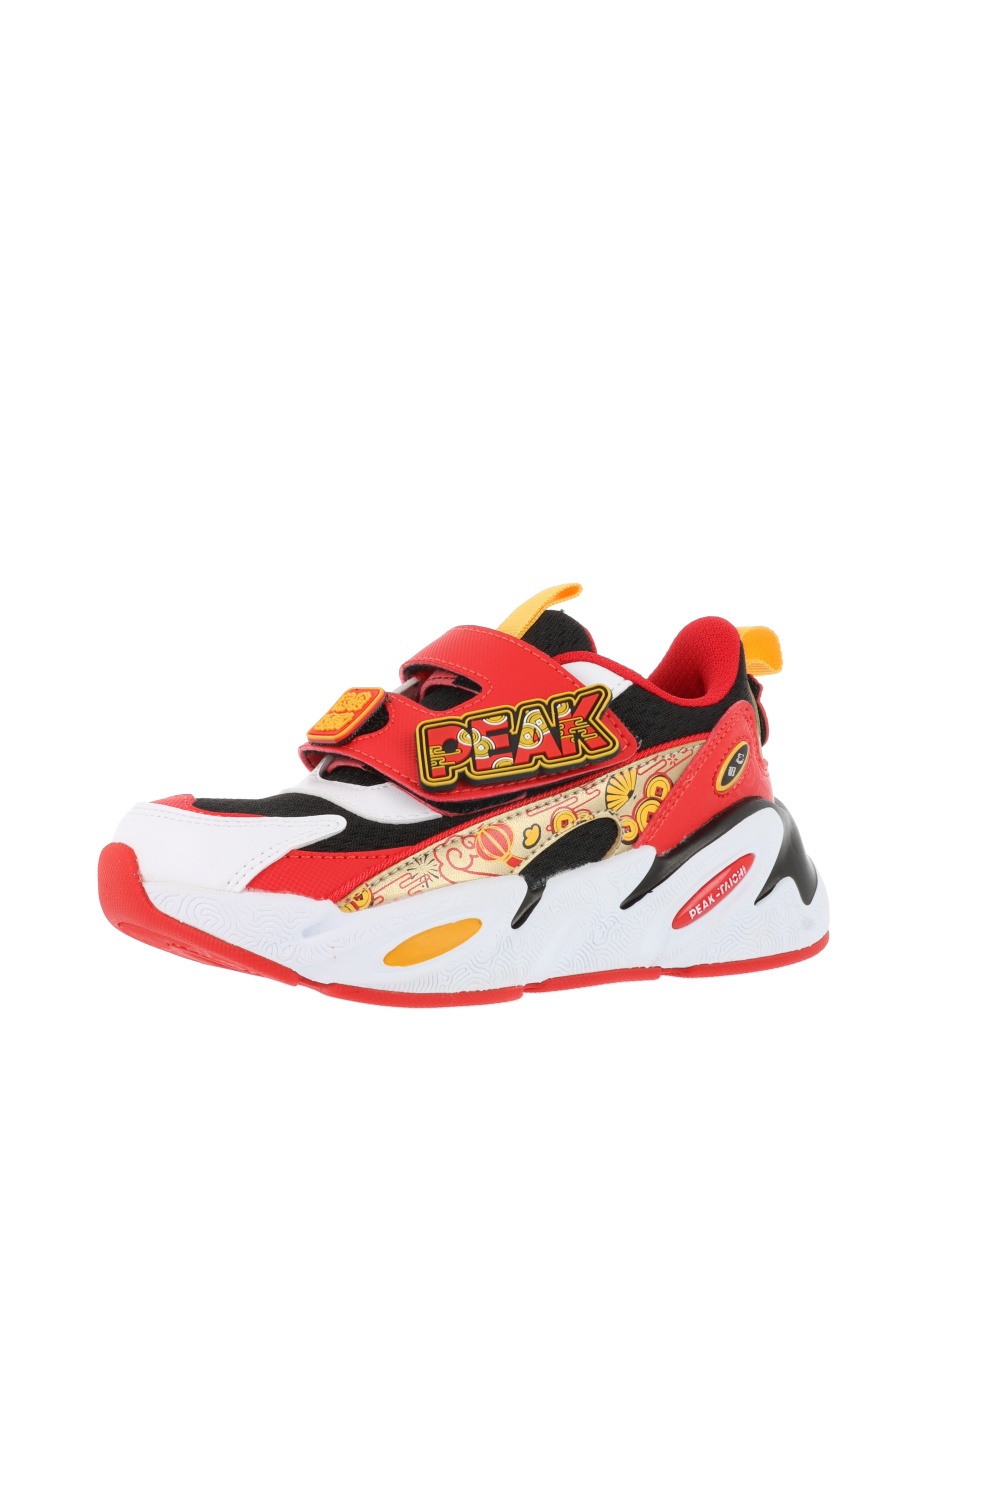 PEAK Kids Casual Shoes New Year Tiger